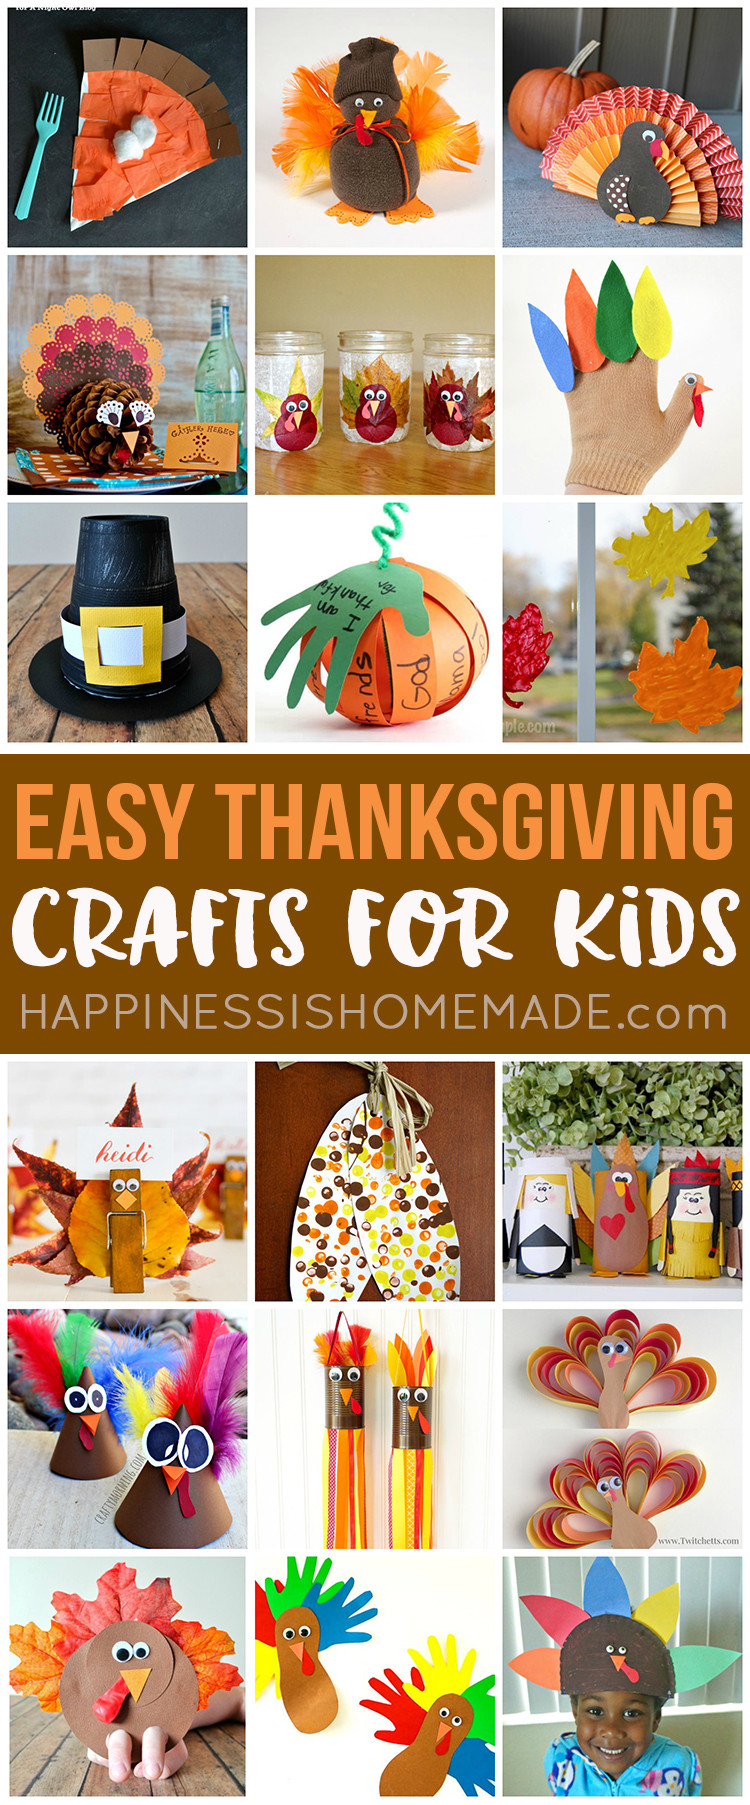 Easy Fun Crafts For Toddlers
 Easy Thanksgiving Crafts for Kids to Make Happiness is